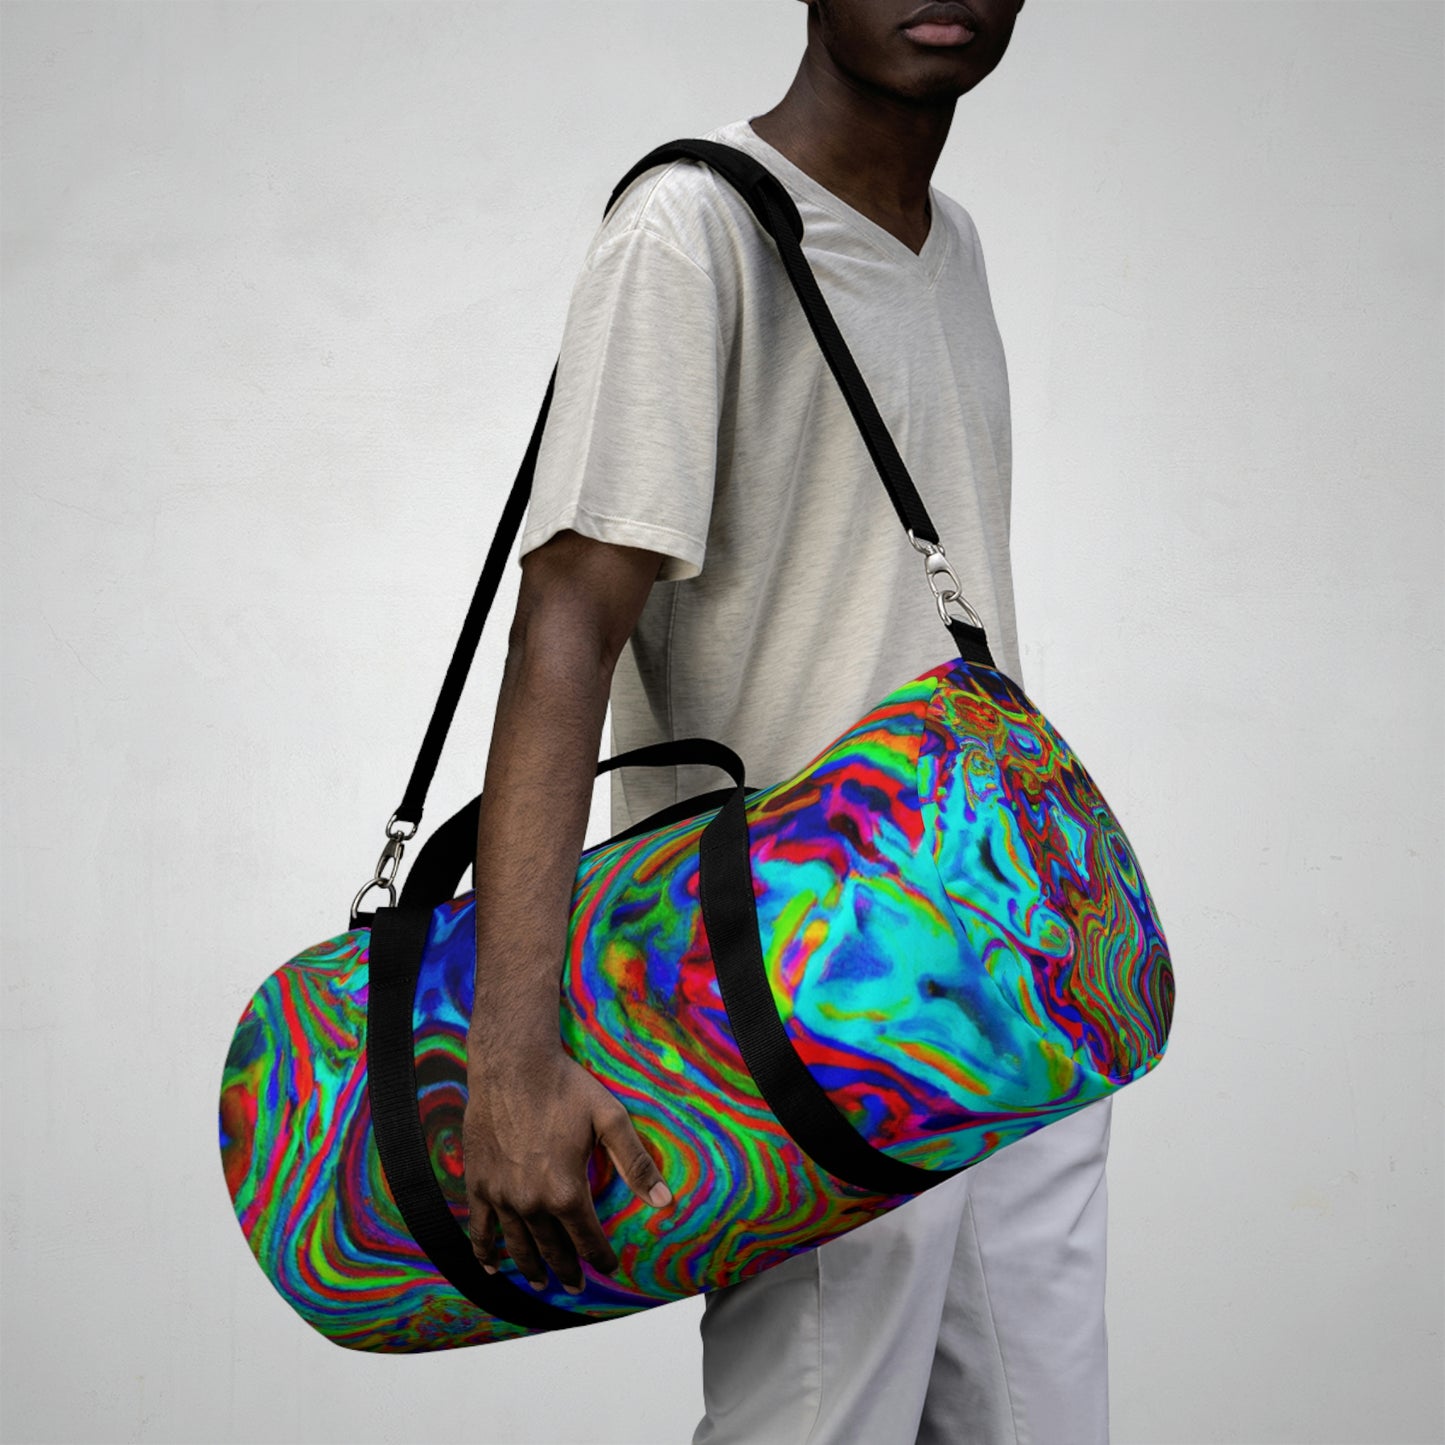 Harlyn Couture - Psychedelic Duffel Bag